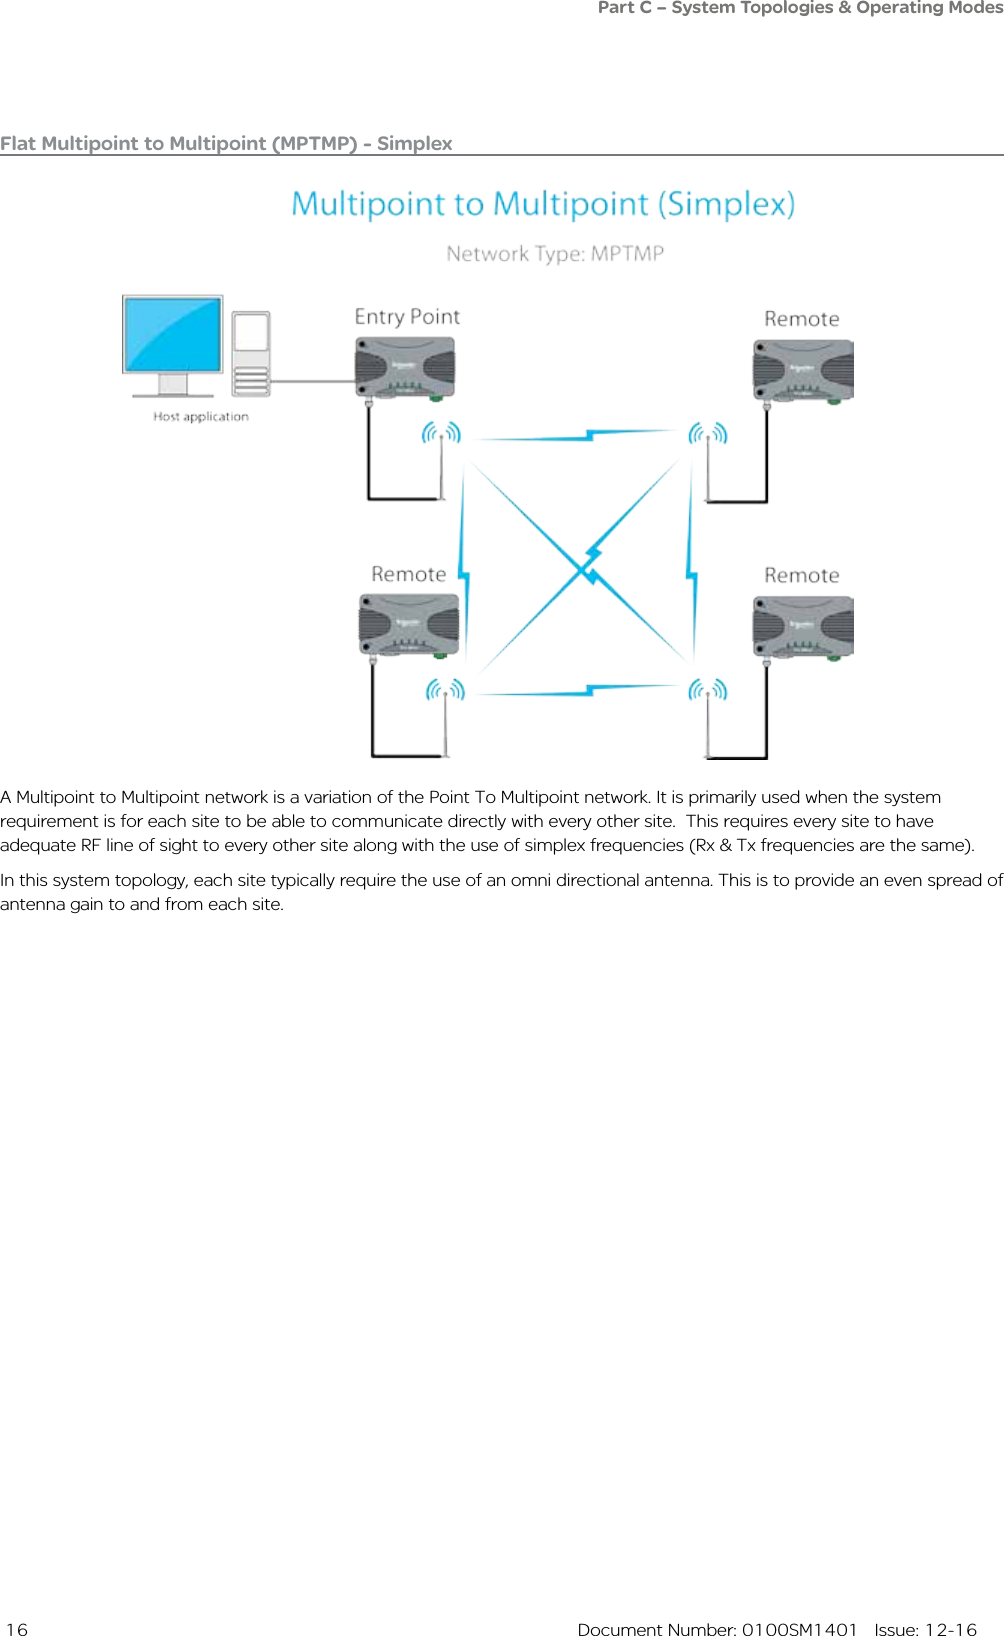  16  Document Number: 0100SM1401   Issue: 12-16Flat Multipoint to Multipoint (MPTMP) - SimplexA Multipoint to Multipoint network is a variation of the Point To Multipoint network. It is primarily used when the system requirement is for each site to be able to communicate directly with every other site.  This requires every site to have adequate RF line of sight to every other site along with the use of simplex frequencies (Rx &amp; Tx frequencies are the same).In this system topology, each site typically require the use of an omni directional antenna. This is to provide an even spread of antenna gain to and from each site. Part C – System Topologies &amp; Operating Modes